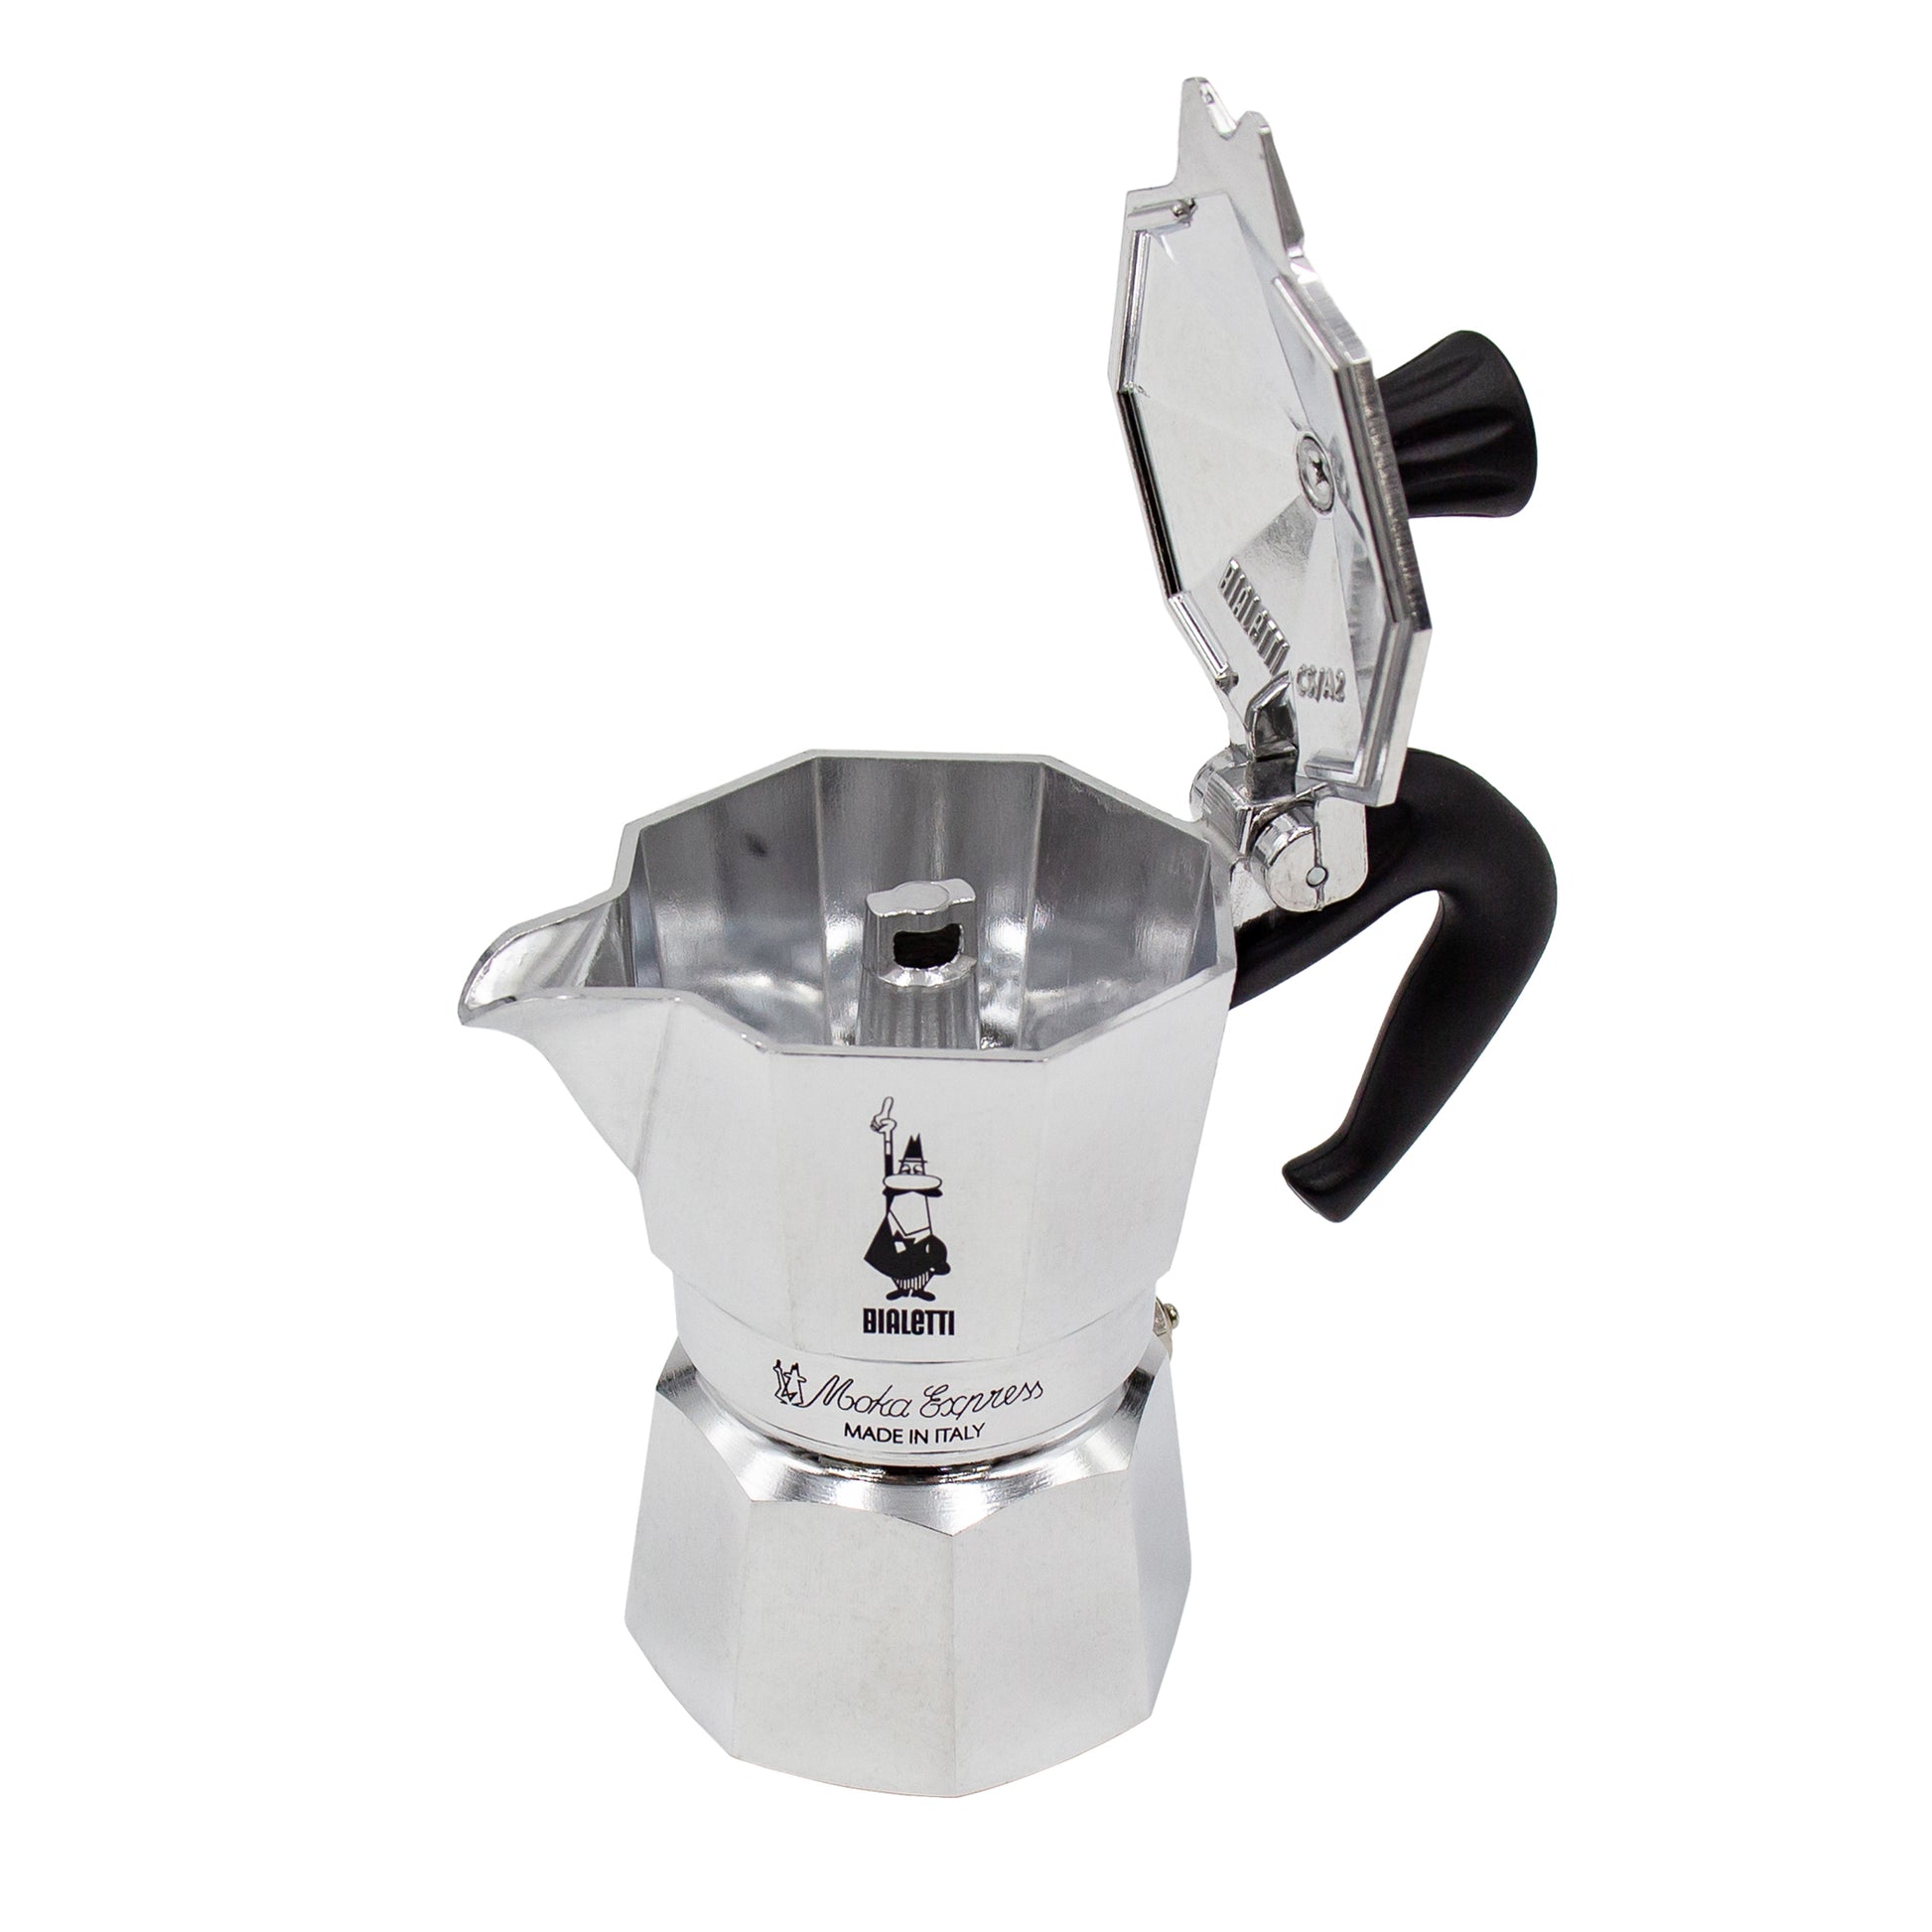 Italian made bialetti moka express 3 cup espresso coffee maker with lid open